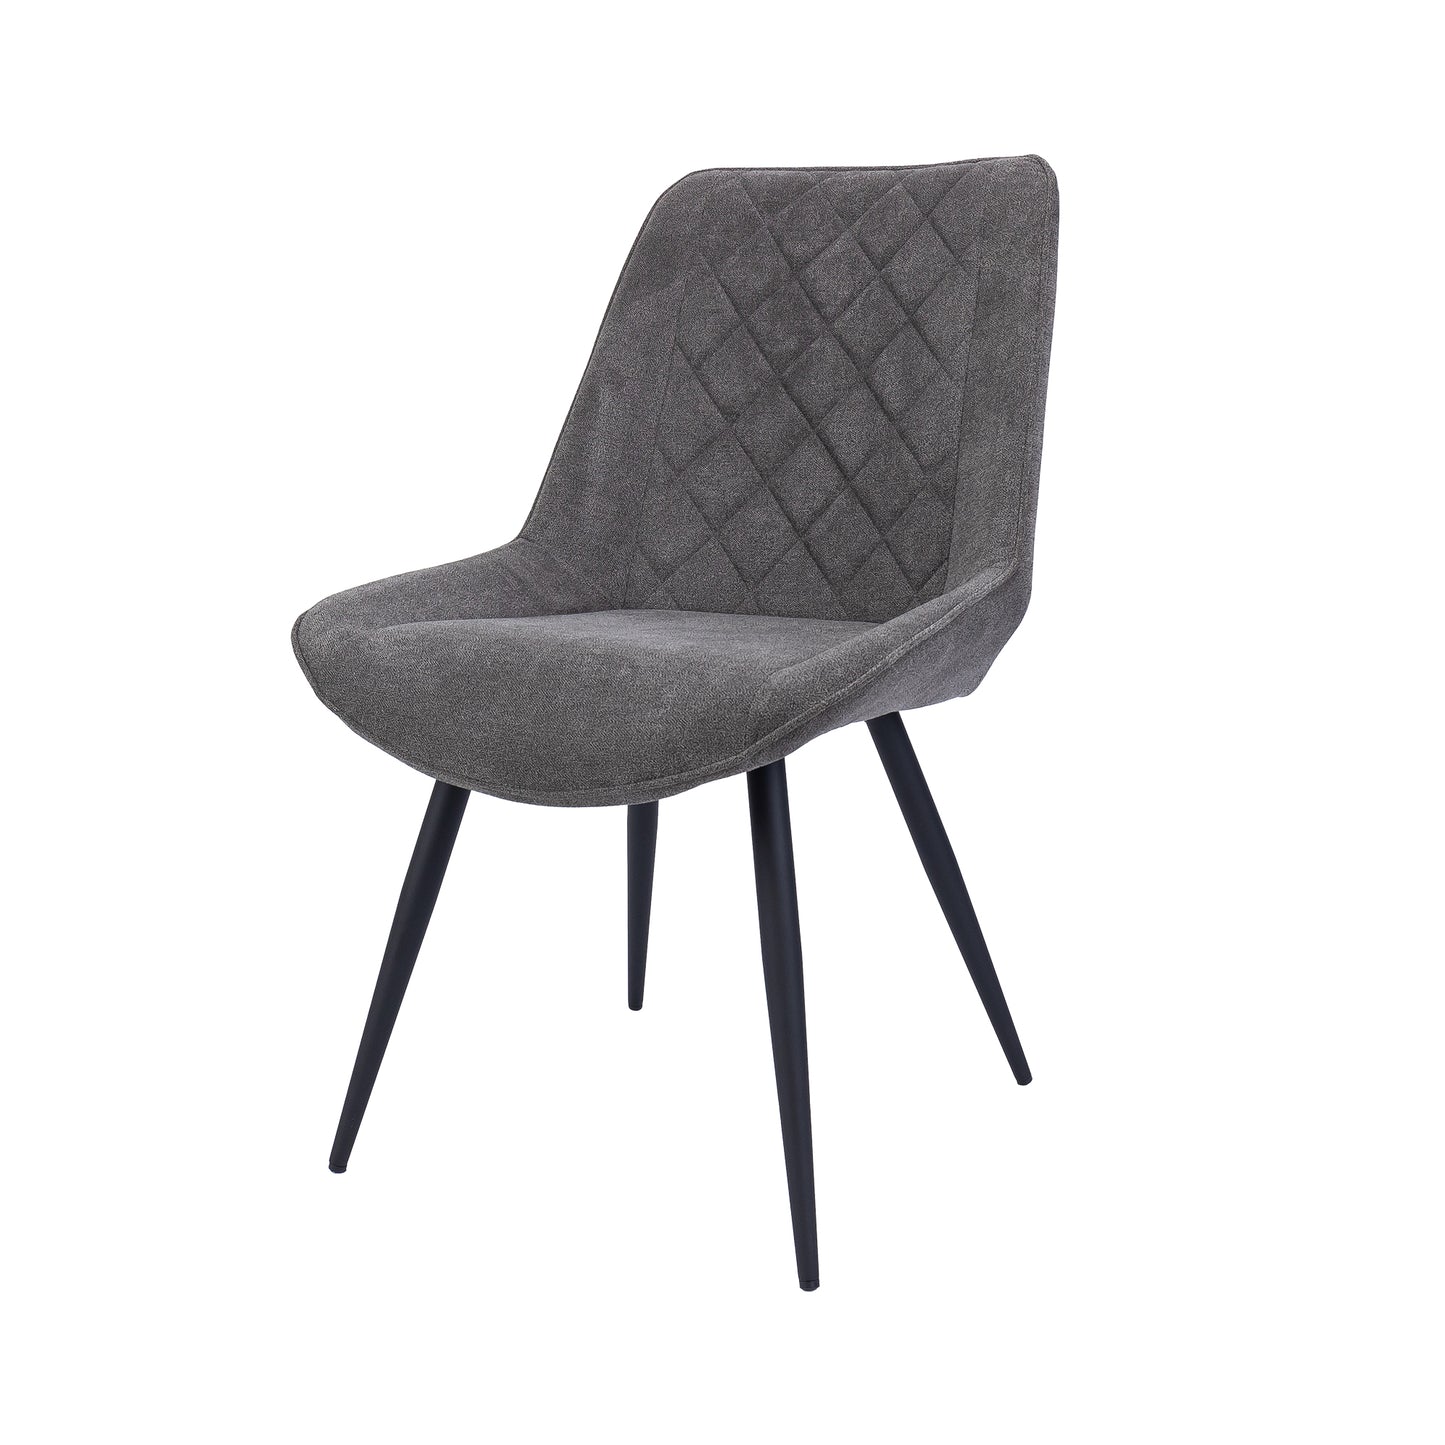 Helenium Dining Chair Set of 4 Fabric Seat with Metal Frame - Graphite